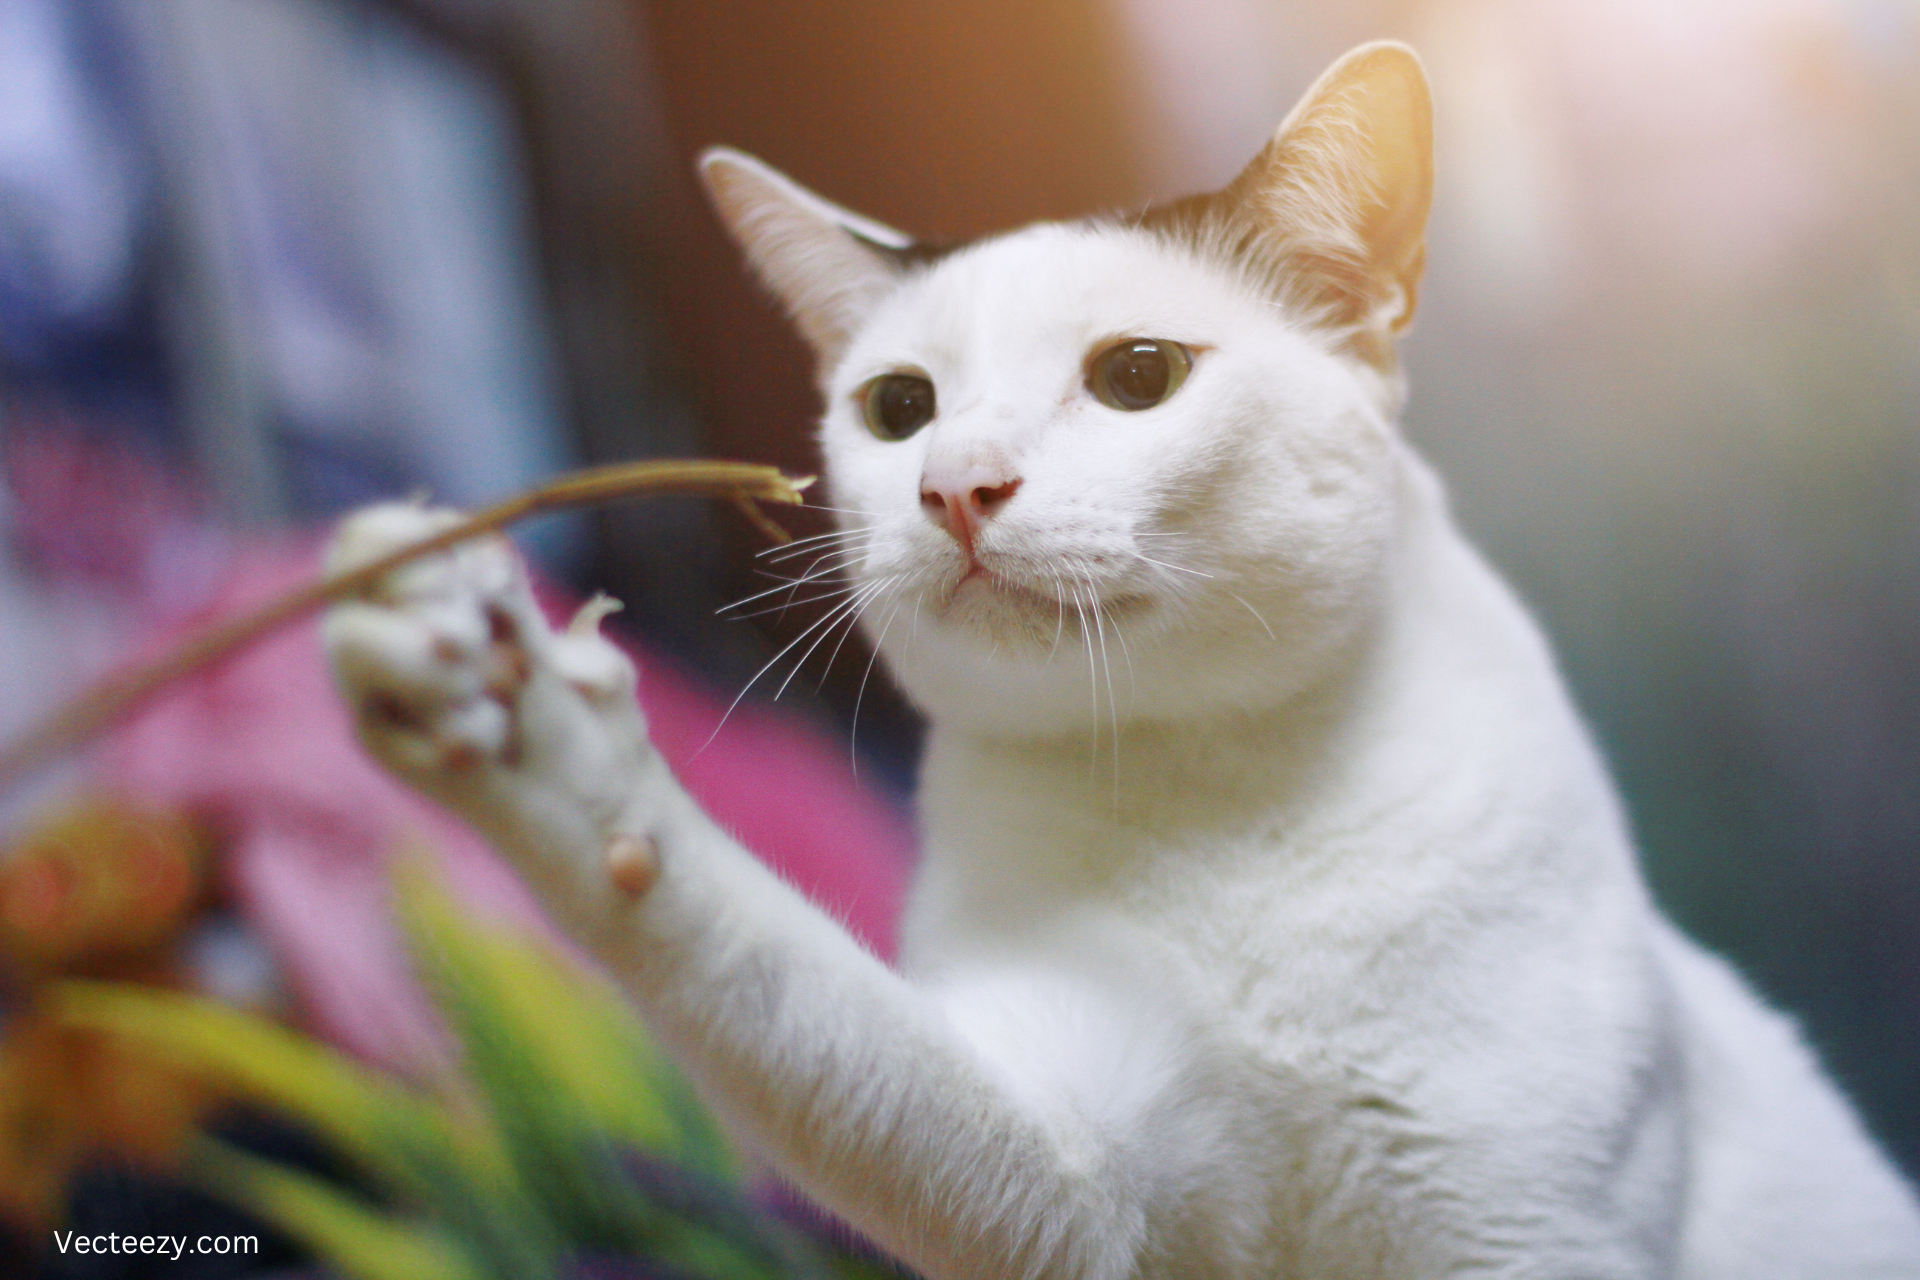 5 Fast and Easy Activities for Feline Enrichment